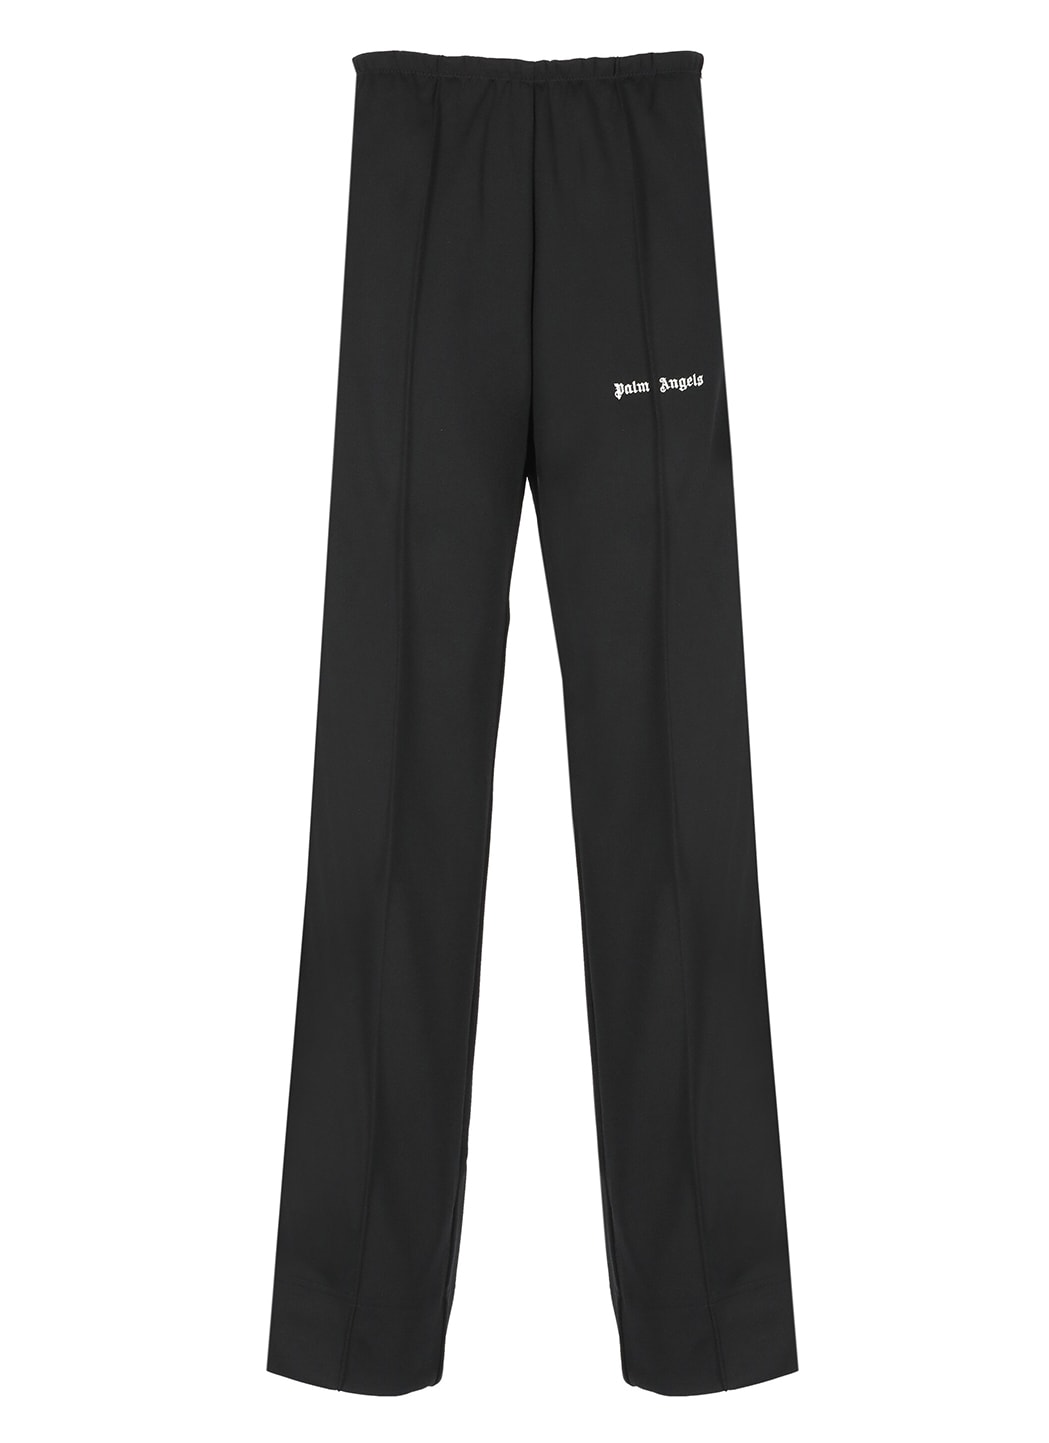 PALM ANGELS CLASSIC PANTS WITH LOGO